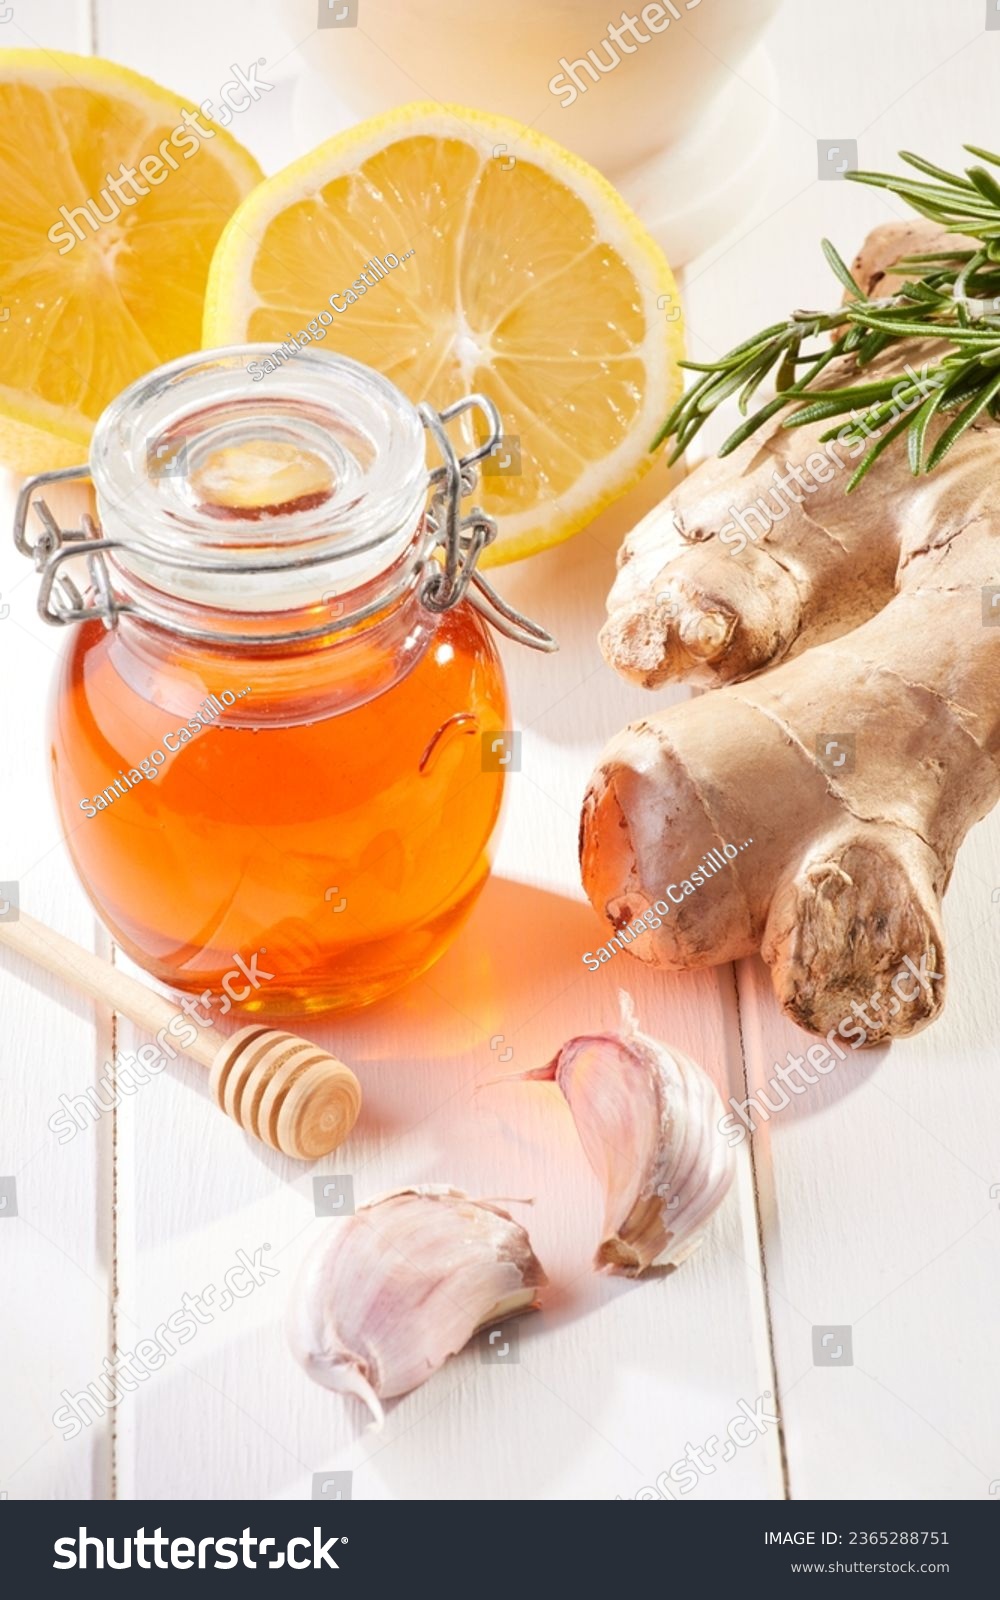 Jar of honey by some ginger, a clove of garlic, rosemary leaves and a sliced yellow lemon over a white wooden table. Natural remedies. #2365288751